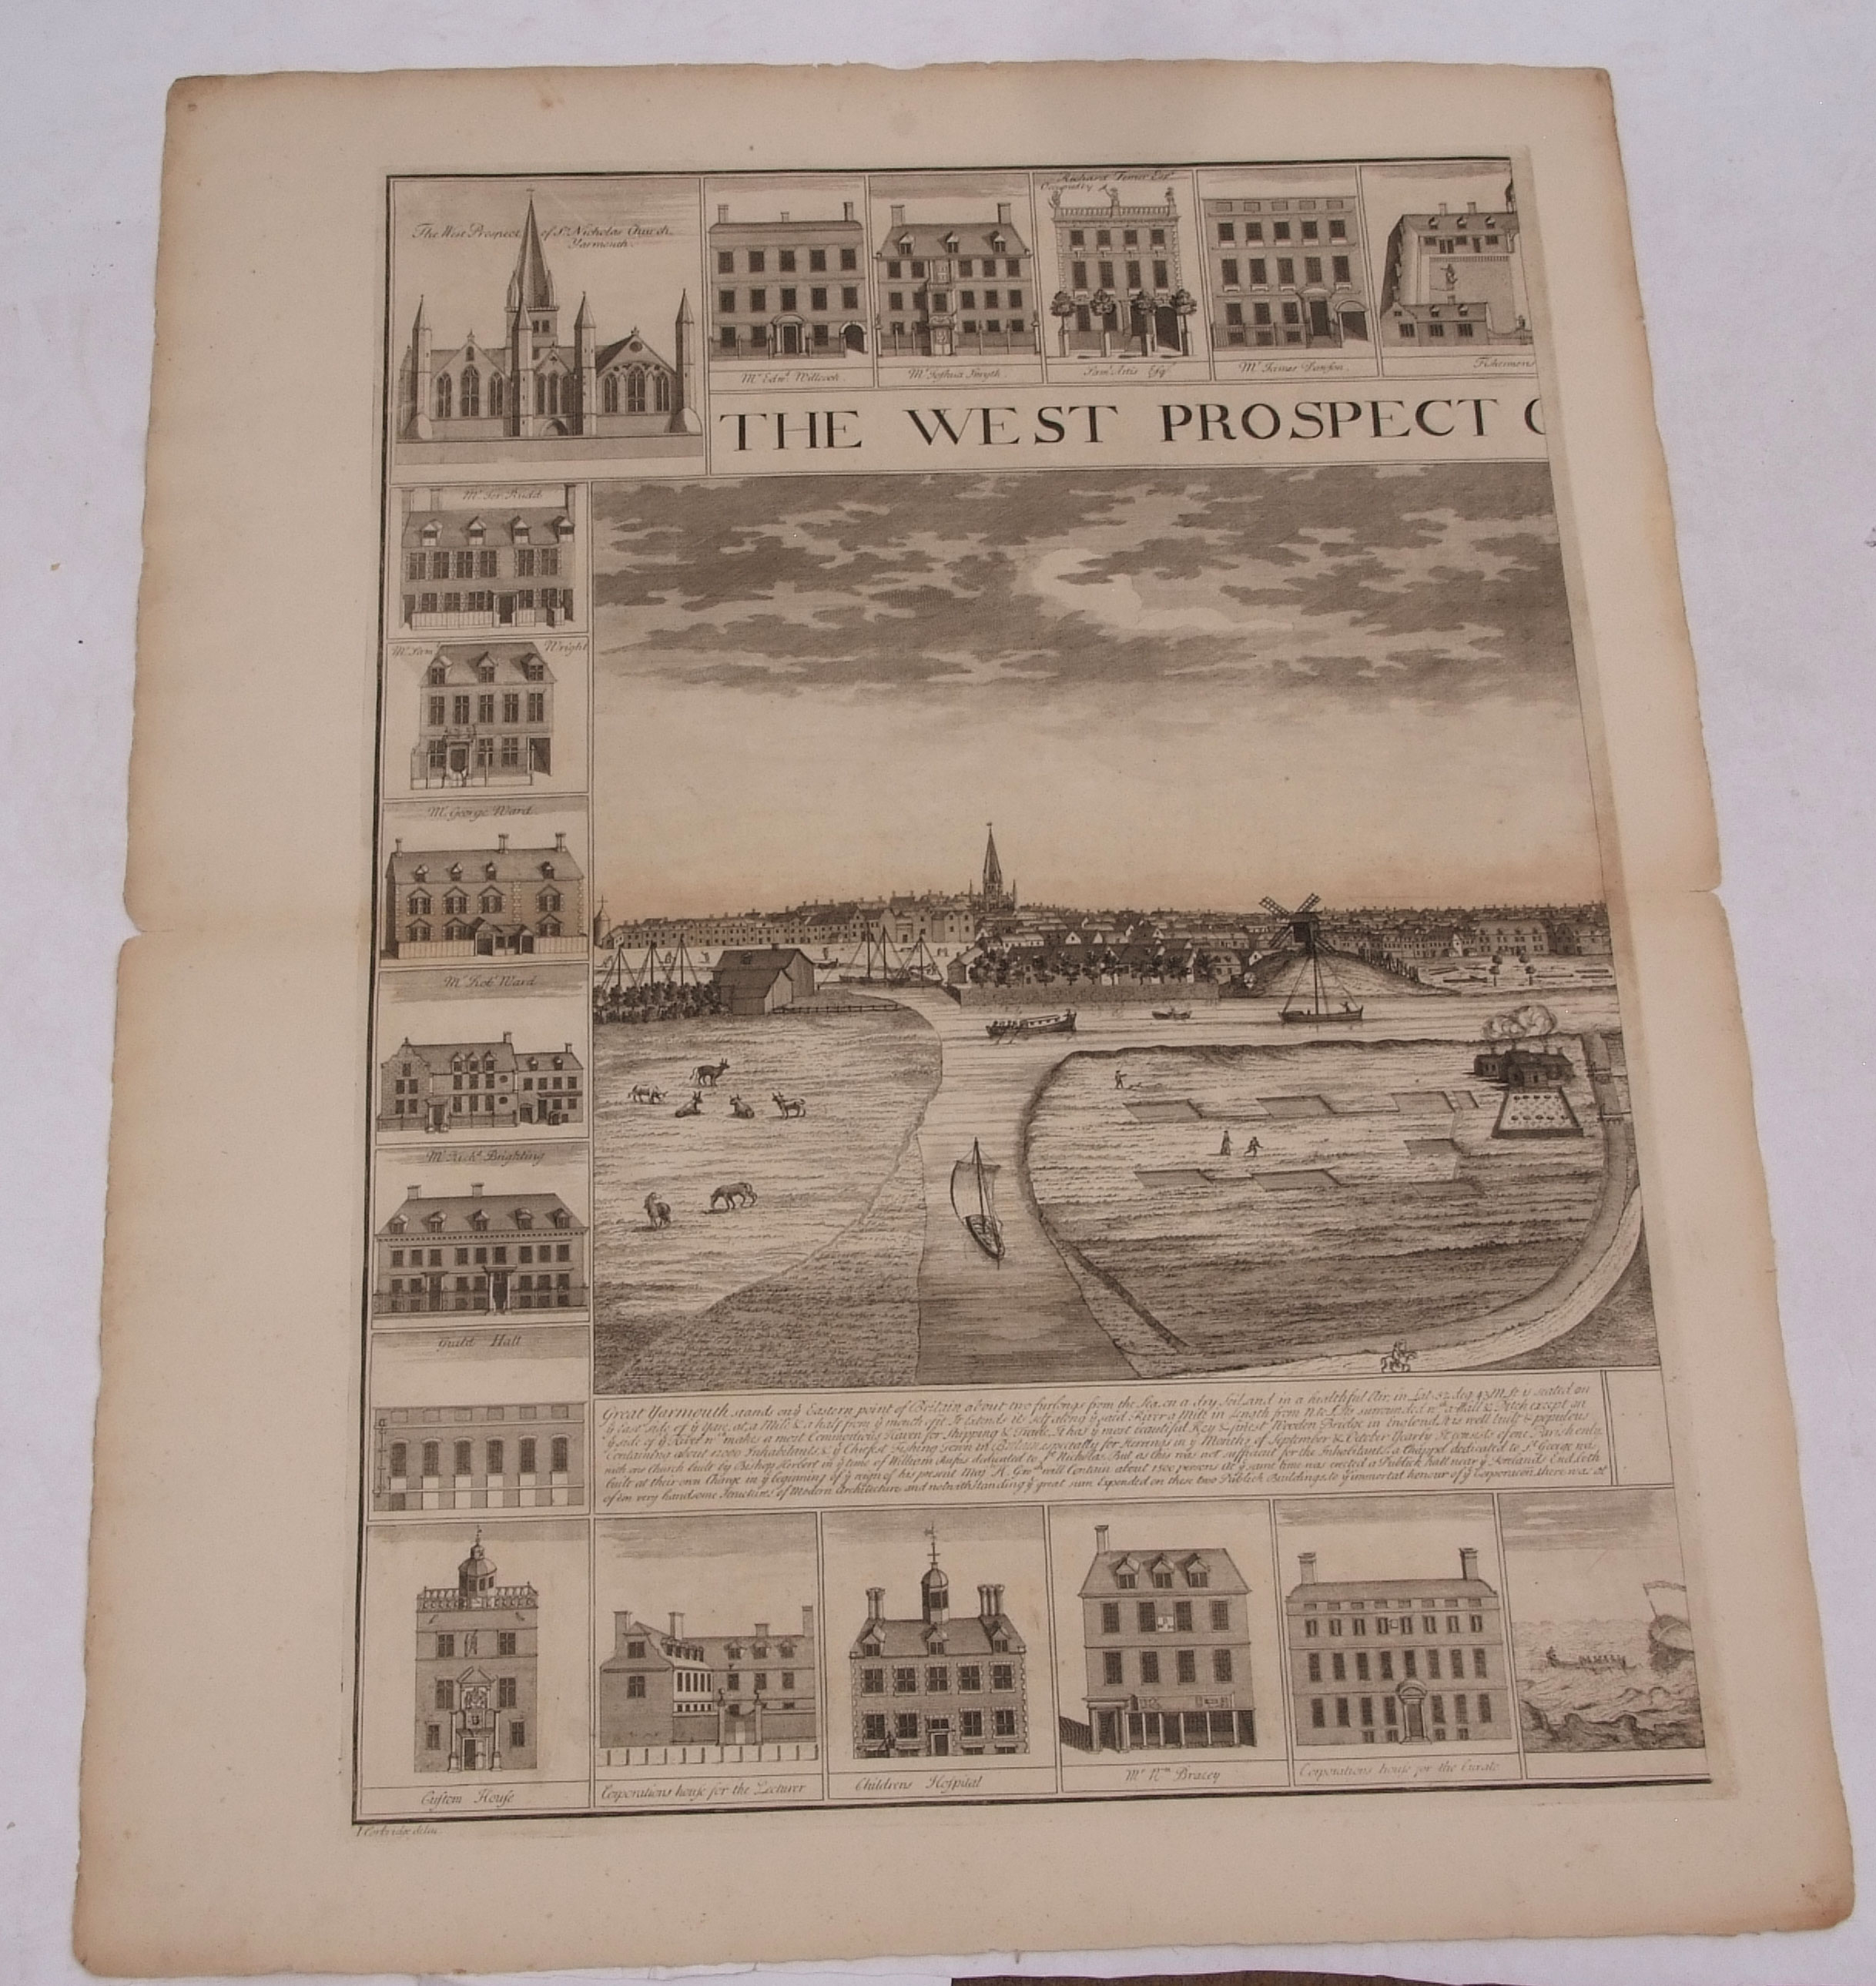 J CORBRIDGE: THE WEST PROSPECT OF THE TOWN OF GREAT YARMOUTH IN NORFOLK, engraved panoramic